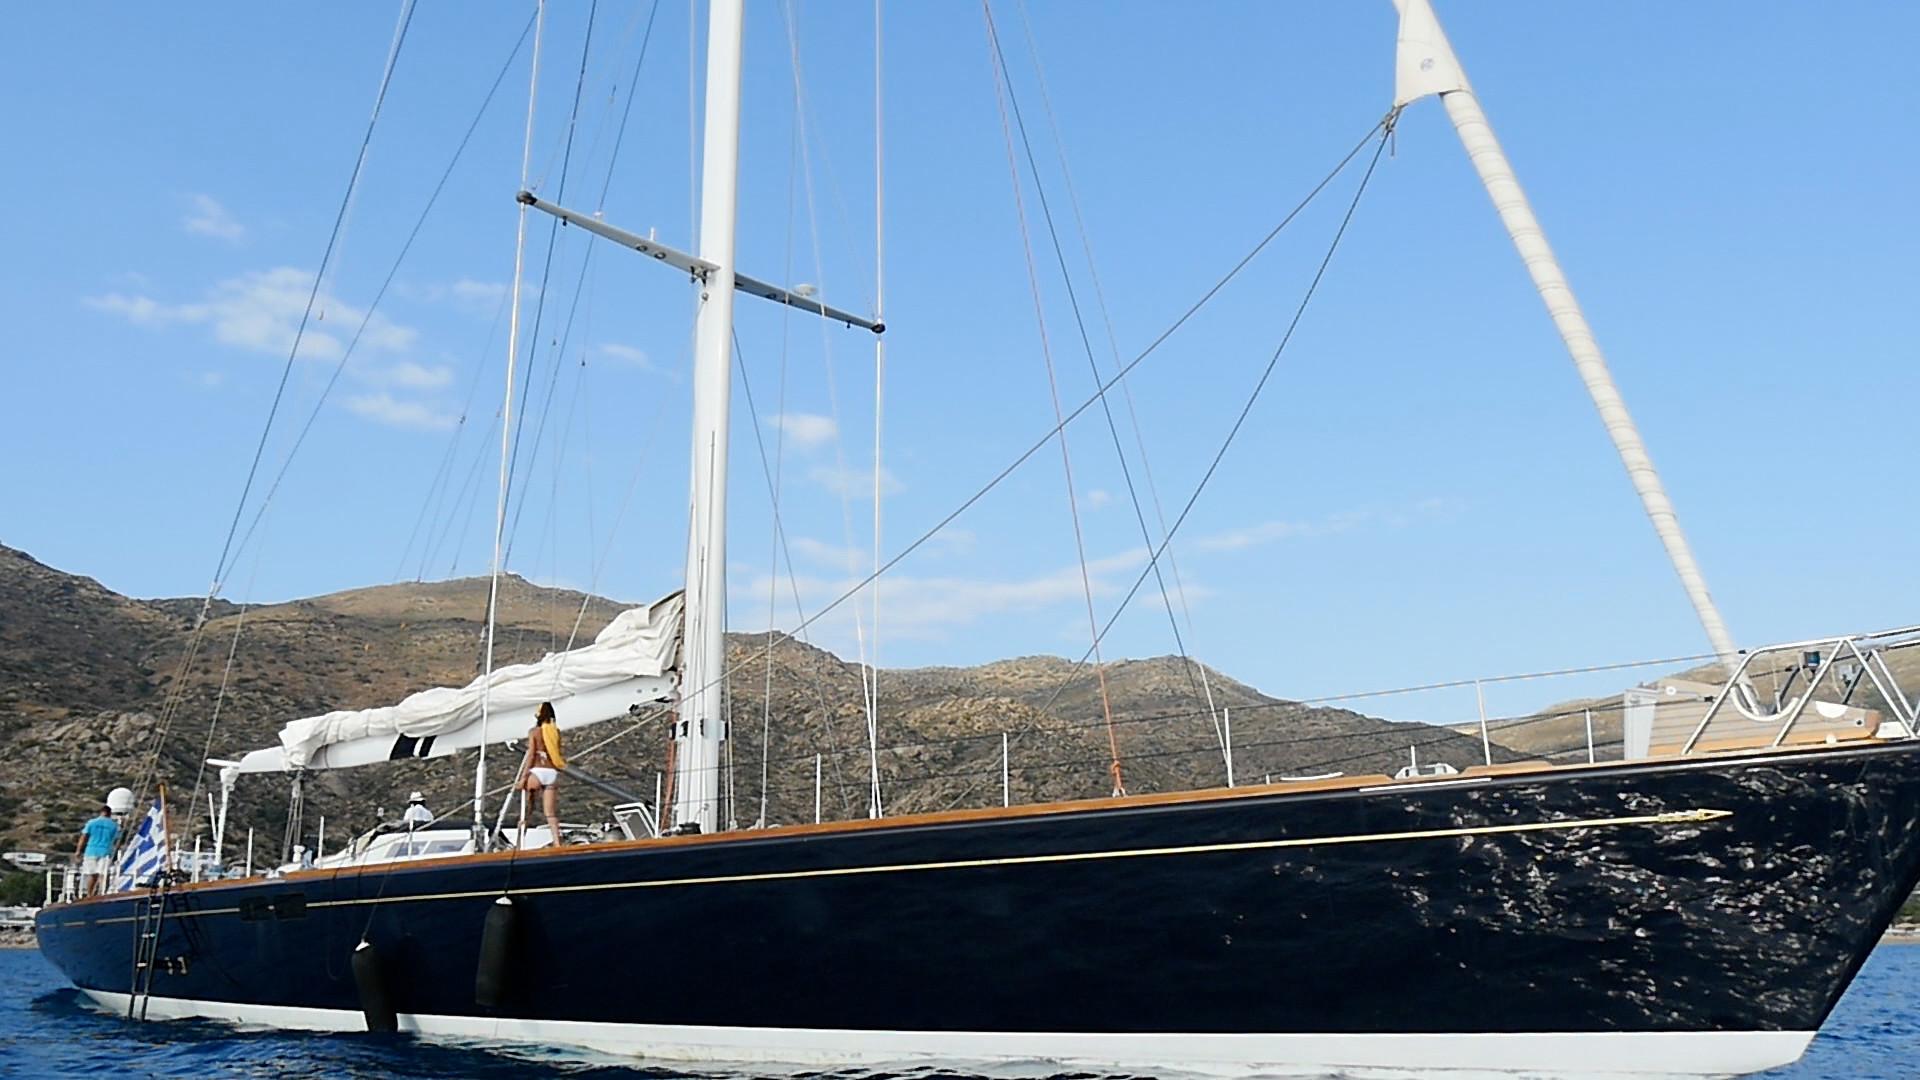 yacht for sale 118 abeking & rasmussen yachts athens, greece denison yacht sales